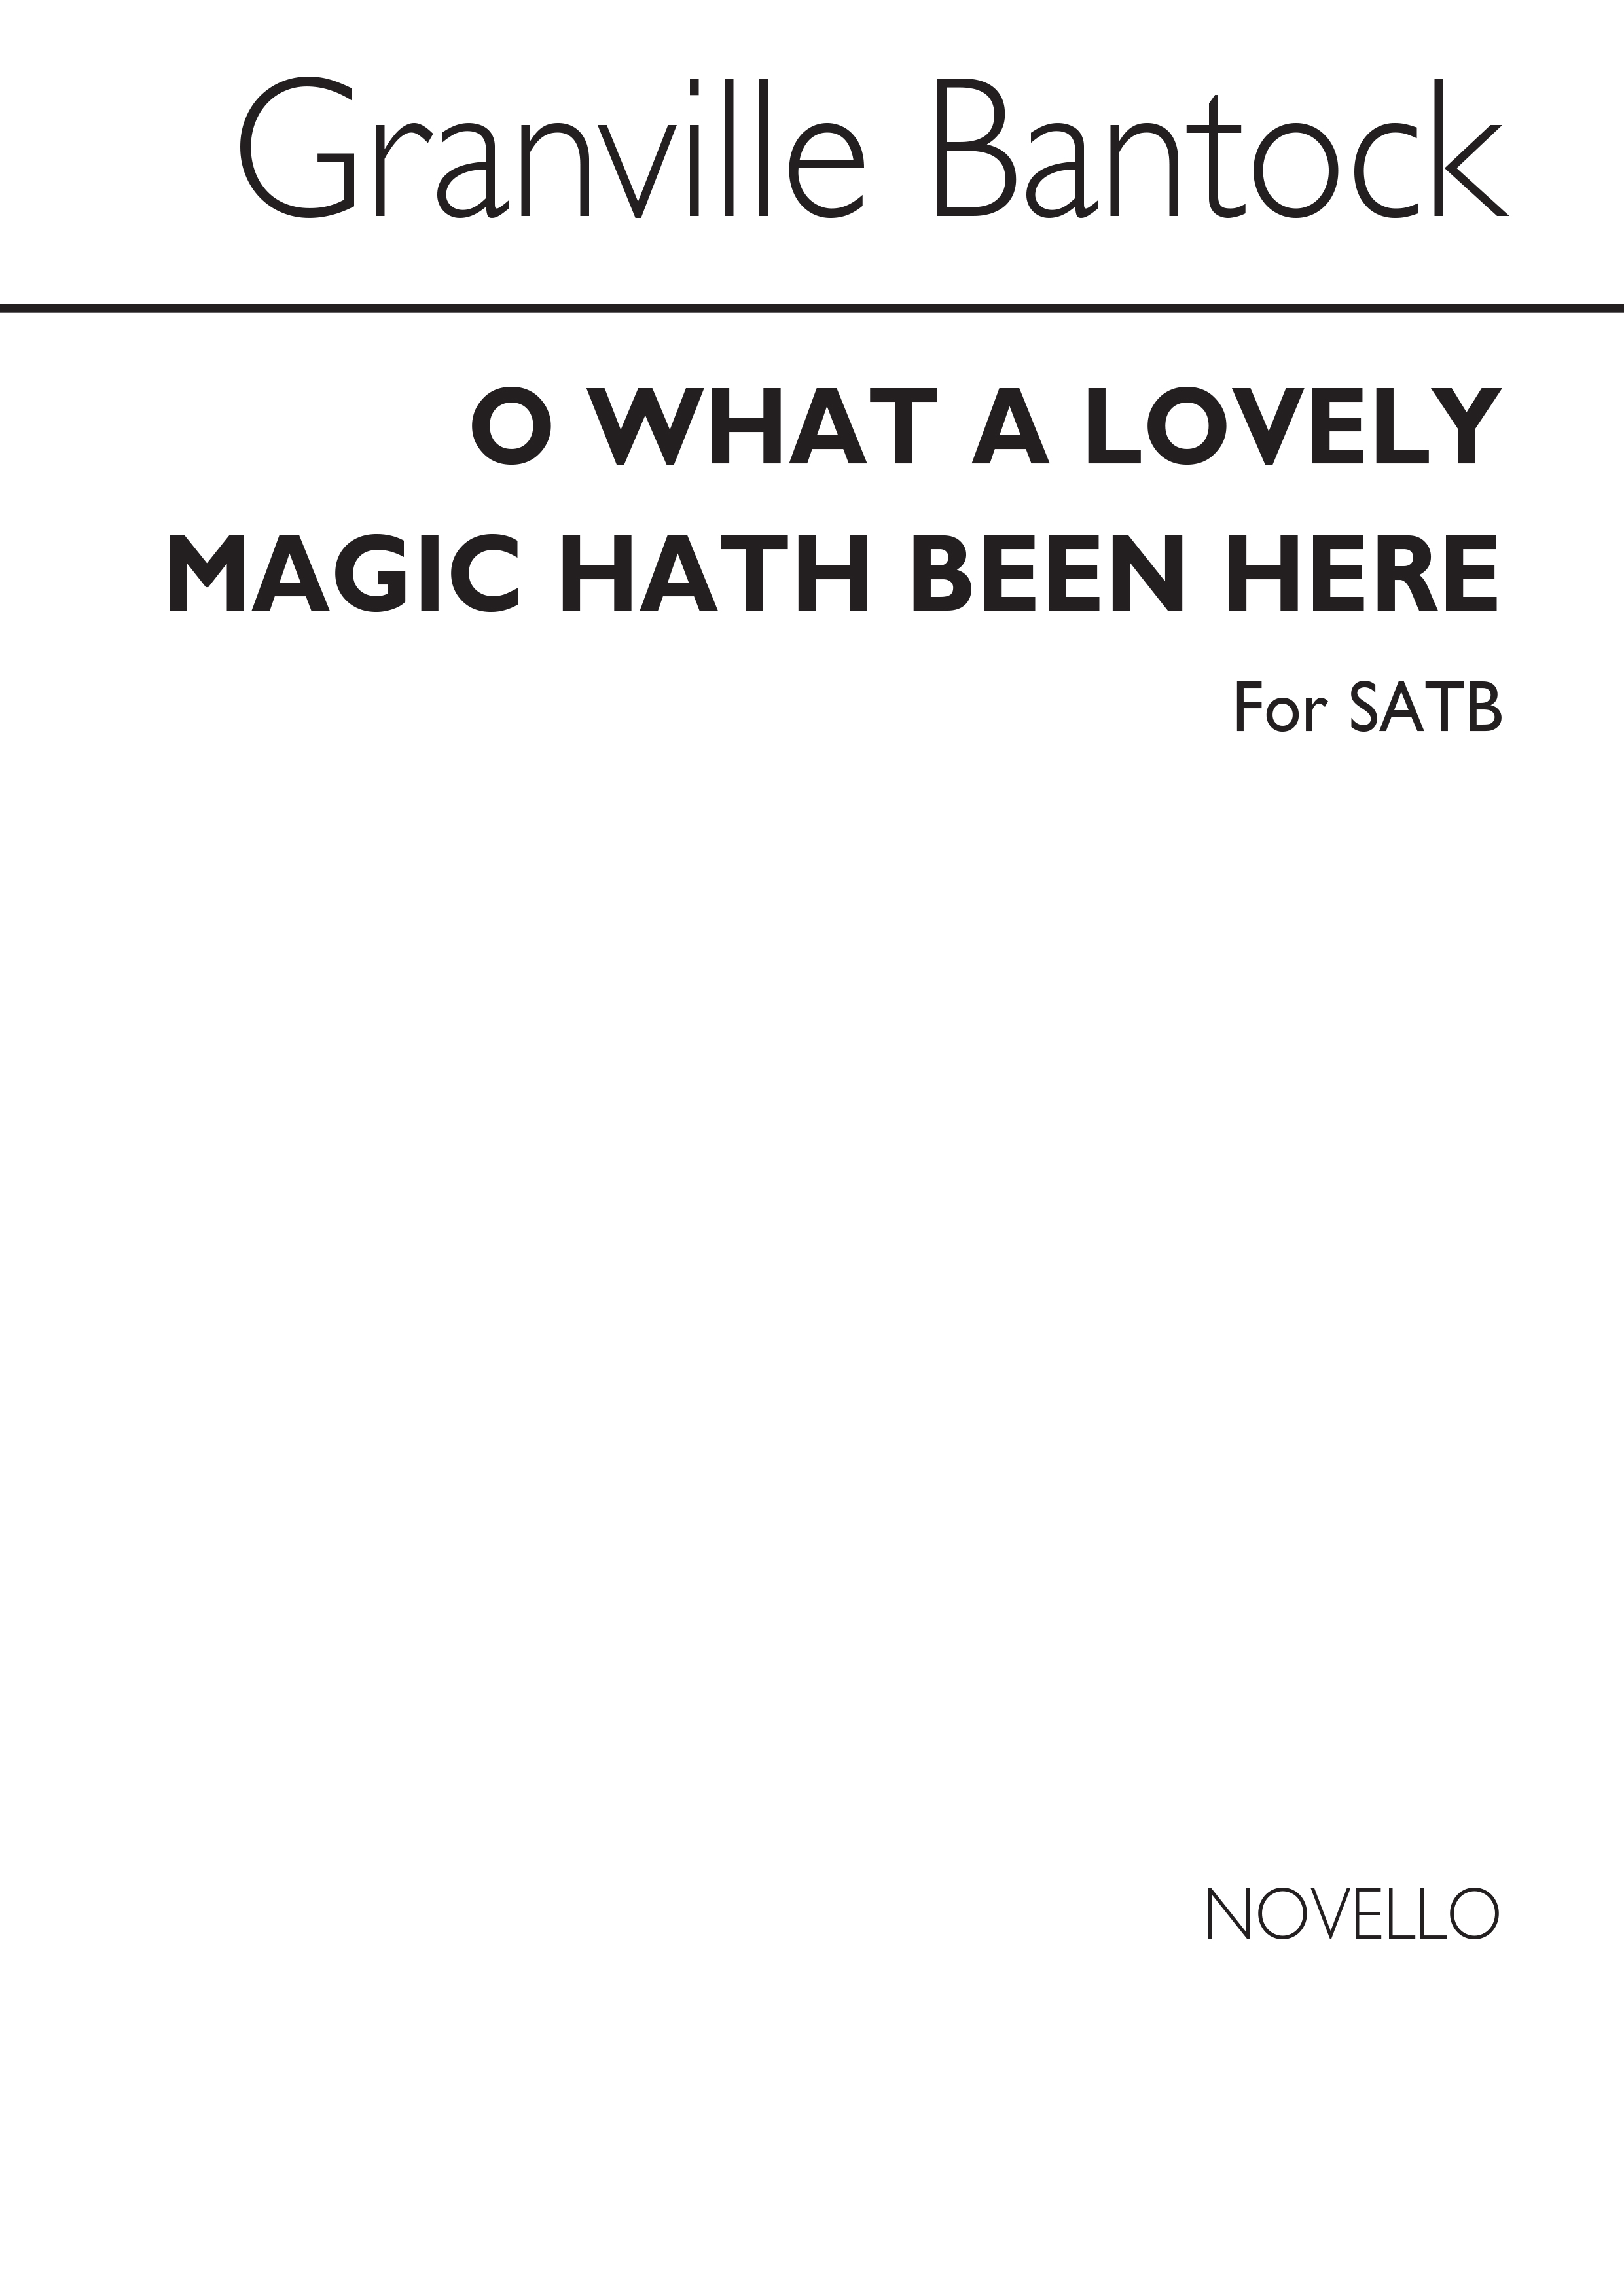 Granville Bantock: O What A Lovely Magic Hath Been Here (SATB)